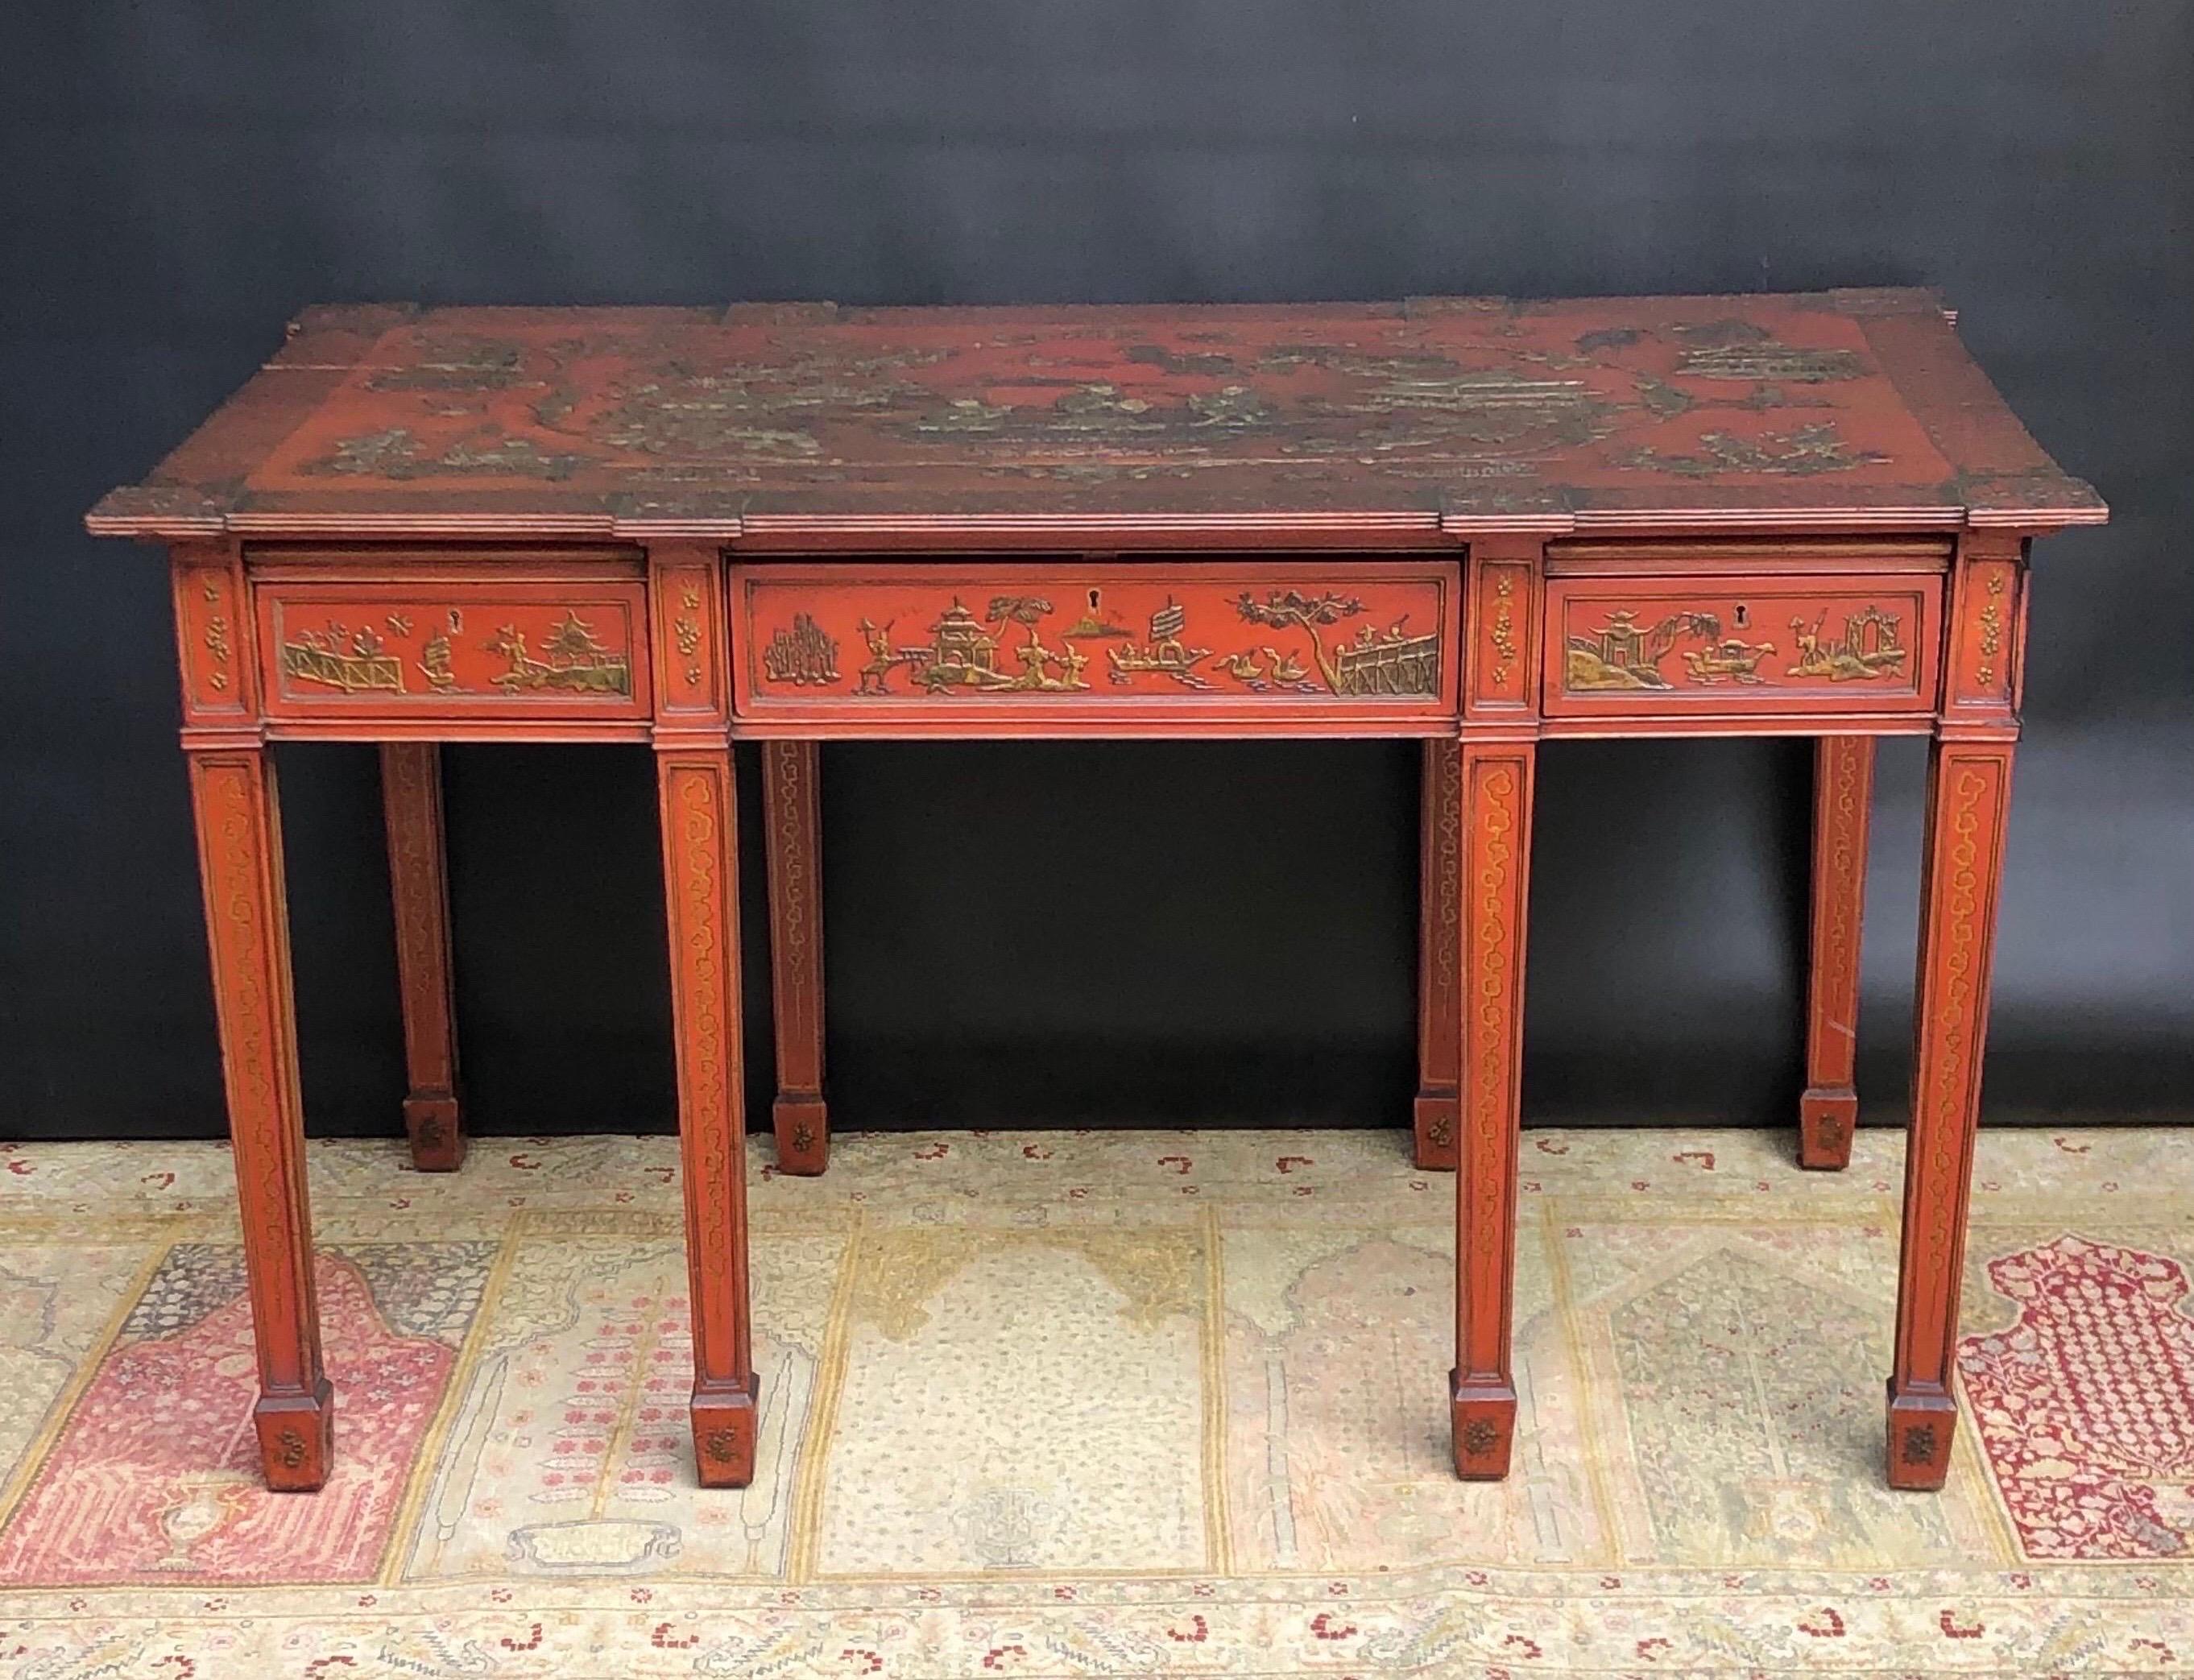 This Elegant English Chinoiserie Partners Writing Desk / Library Table with Exotic Scenes is Japanned in Imperial Red Lacquer. The Chinoiserie Library Table has a rich antique patina and was made in the last quarter of the nineteenth century. The